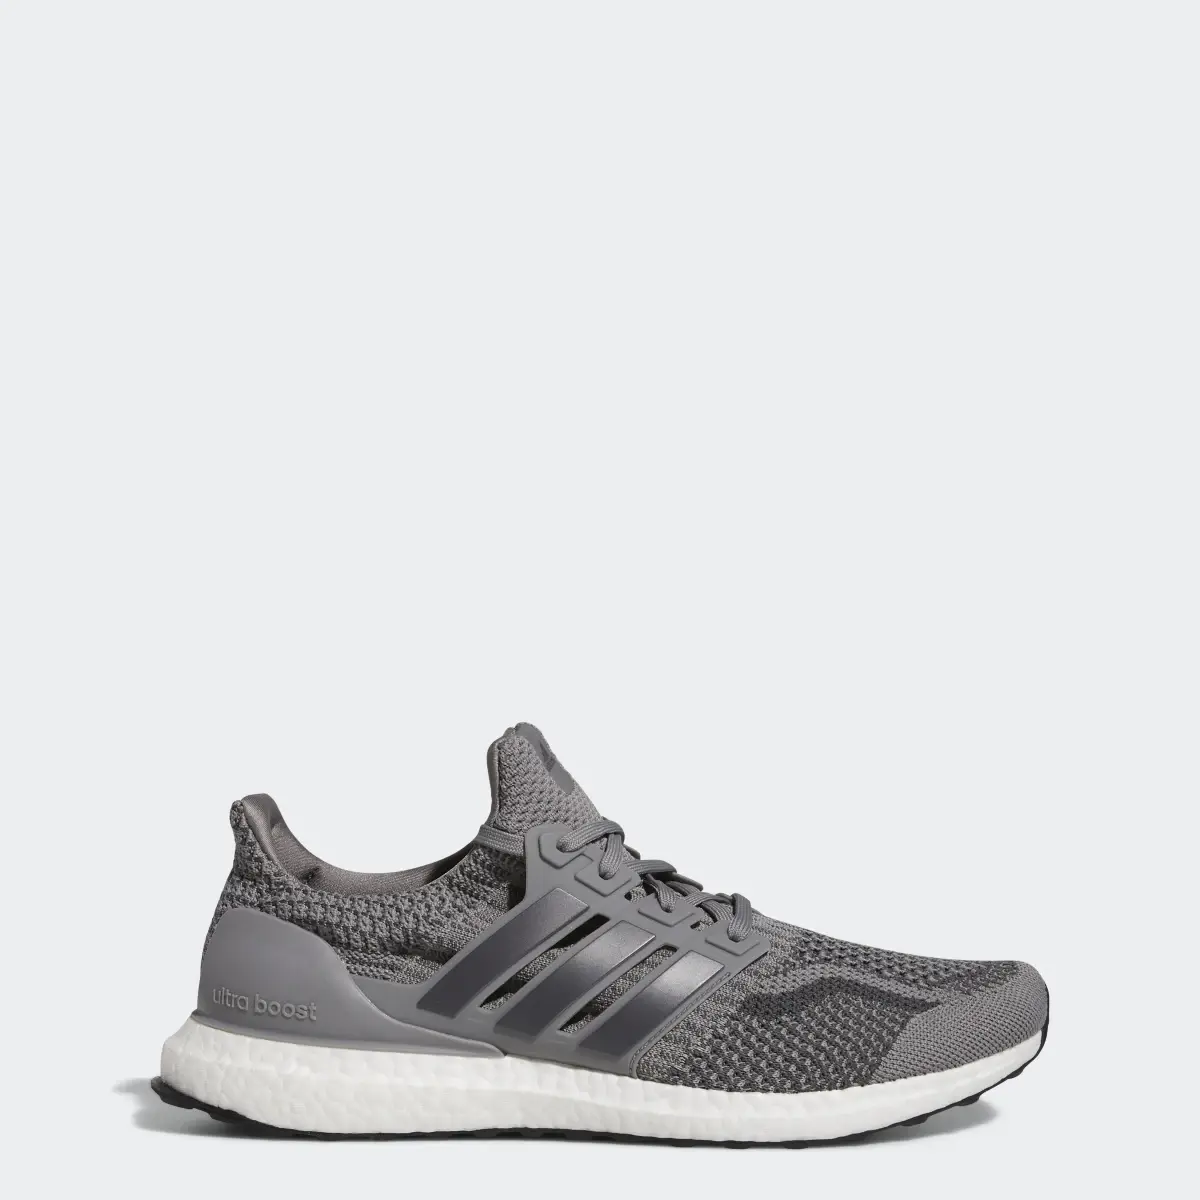 Adidas Ultraboost 5 DNA Running Lifestyle Shoes. 1